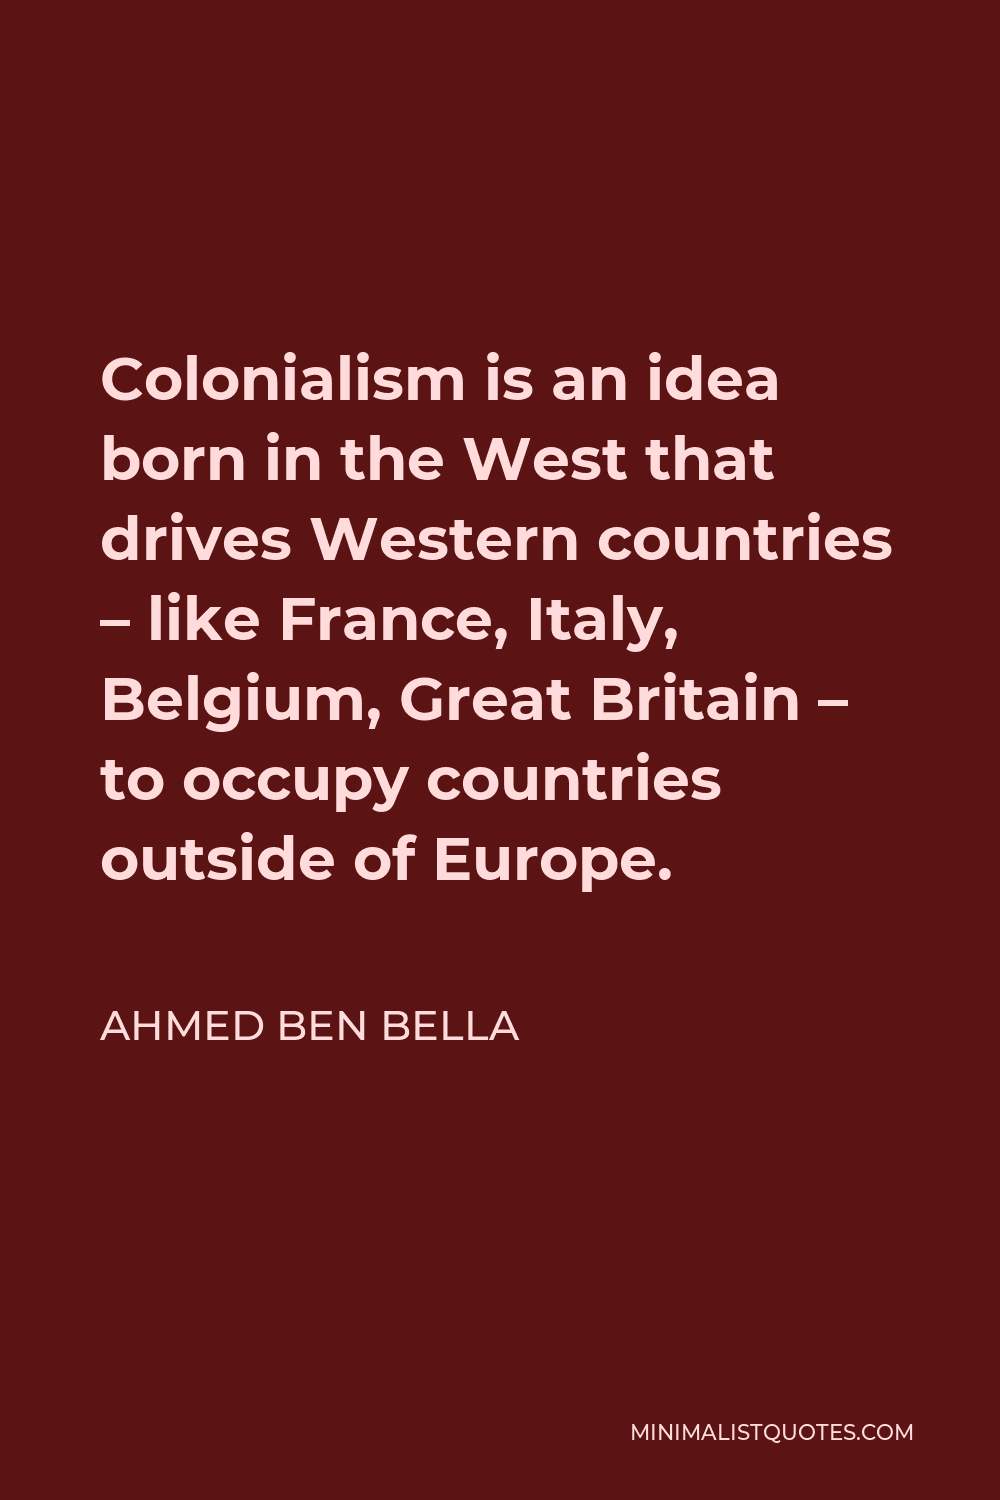 Ahmed Ben Bella Quote - Colonialism is an idea born in the West that drives Western countries – like France, Italy, Belgium, Great Britain – to occupy countries outside of Europe.